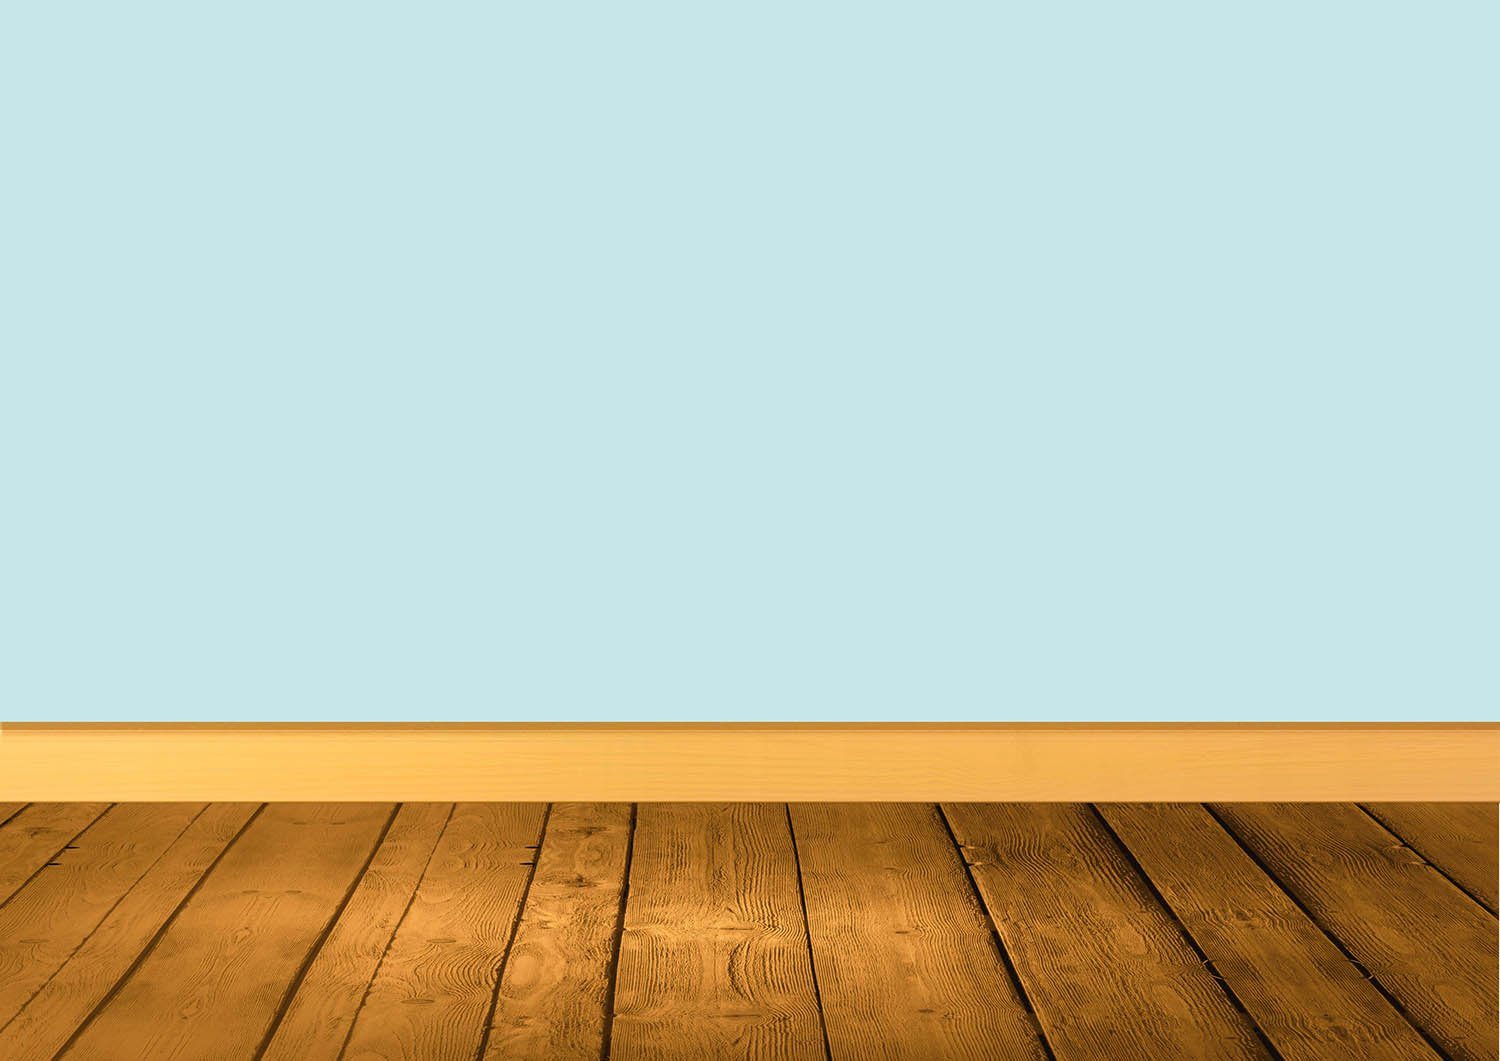 Solid Aqua Blue Wall With Wood Floor Backdrop For Photography Shopbackdrop